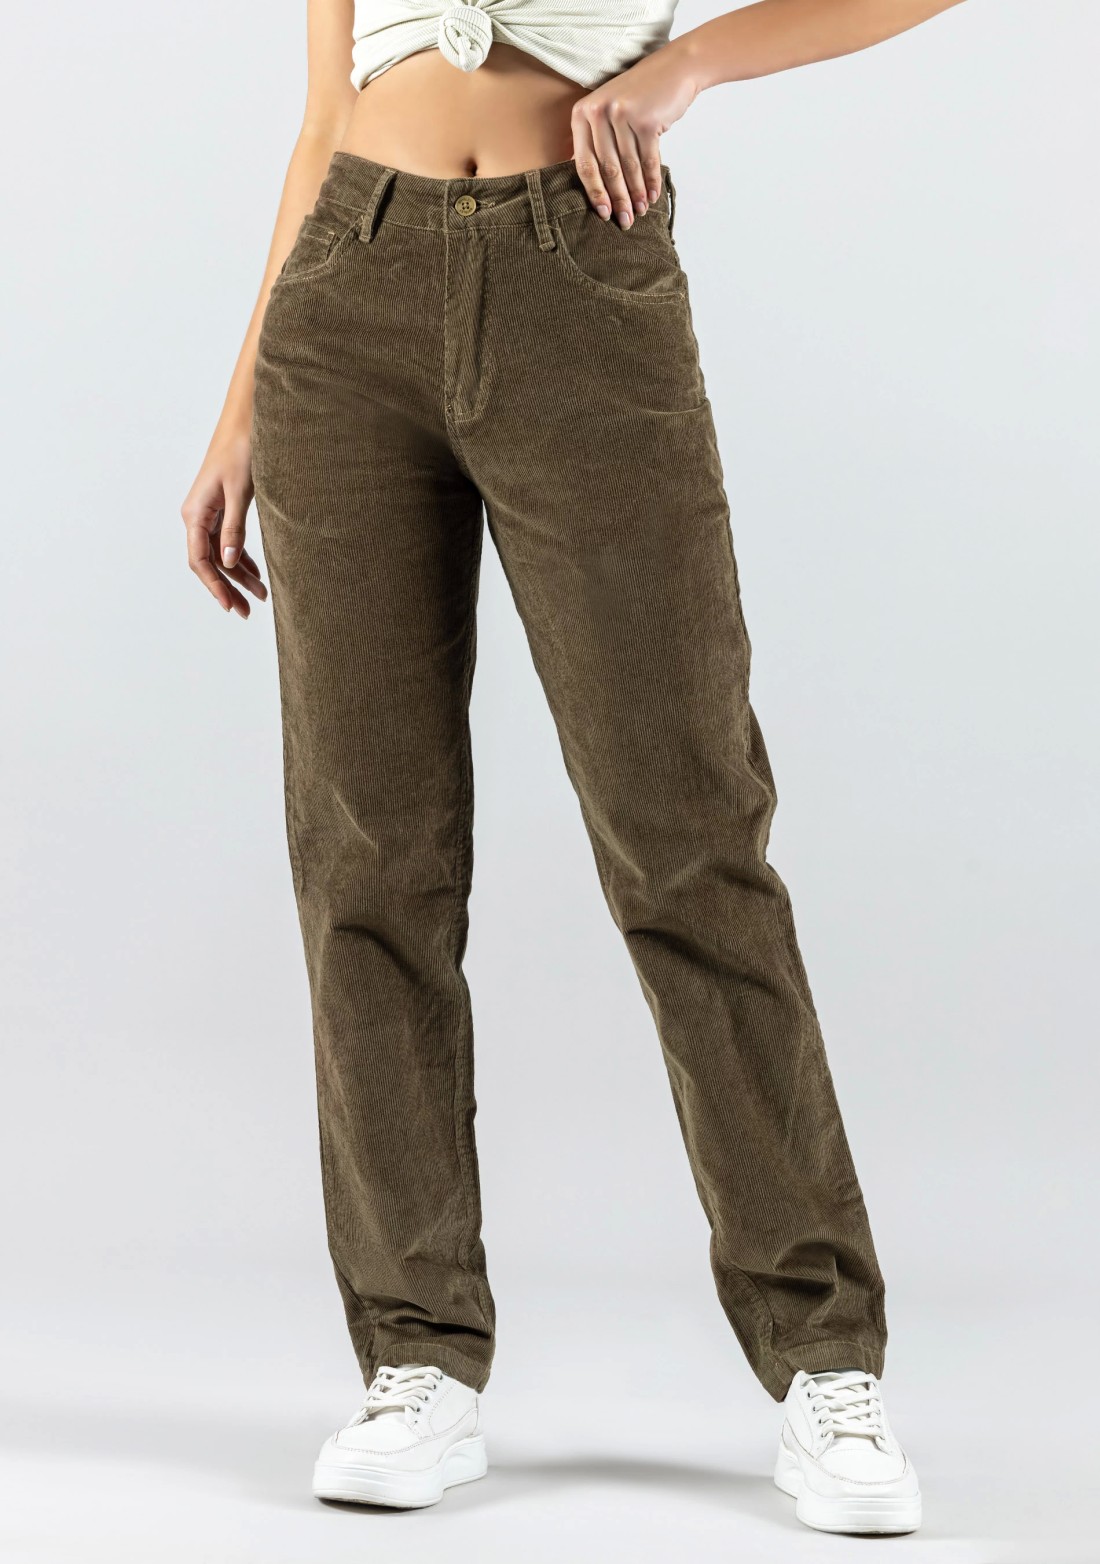 Woolrich Corduroy Pants with 4 Pockets women - Glamood Outlet